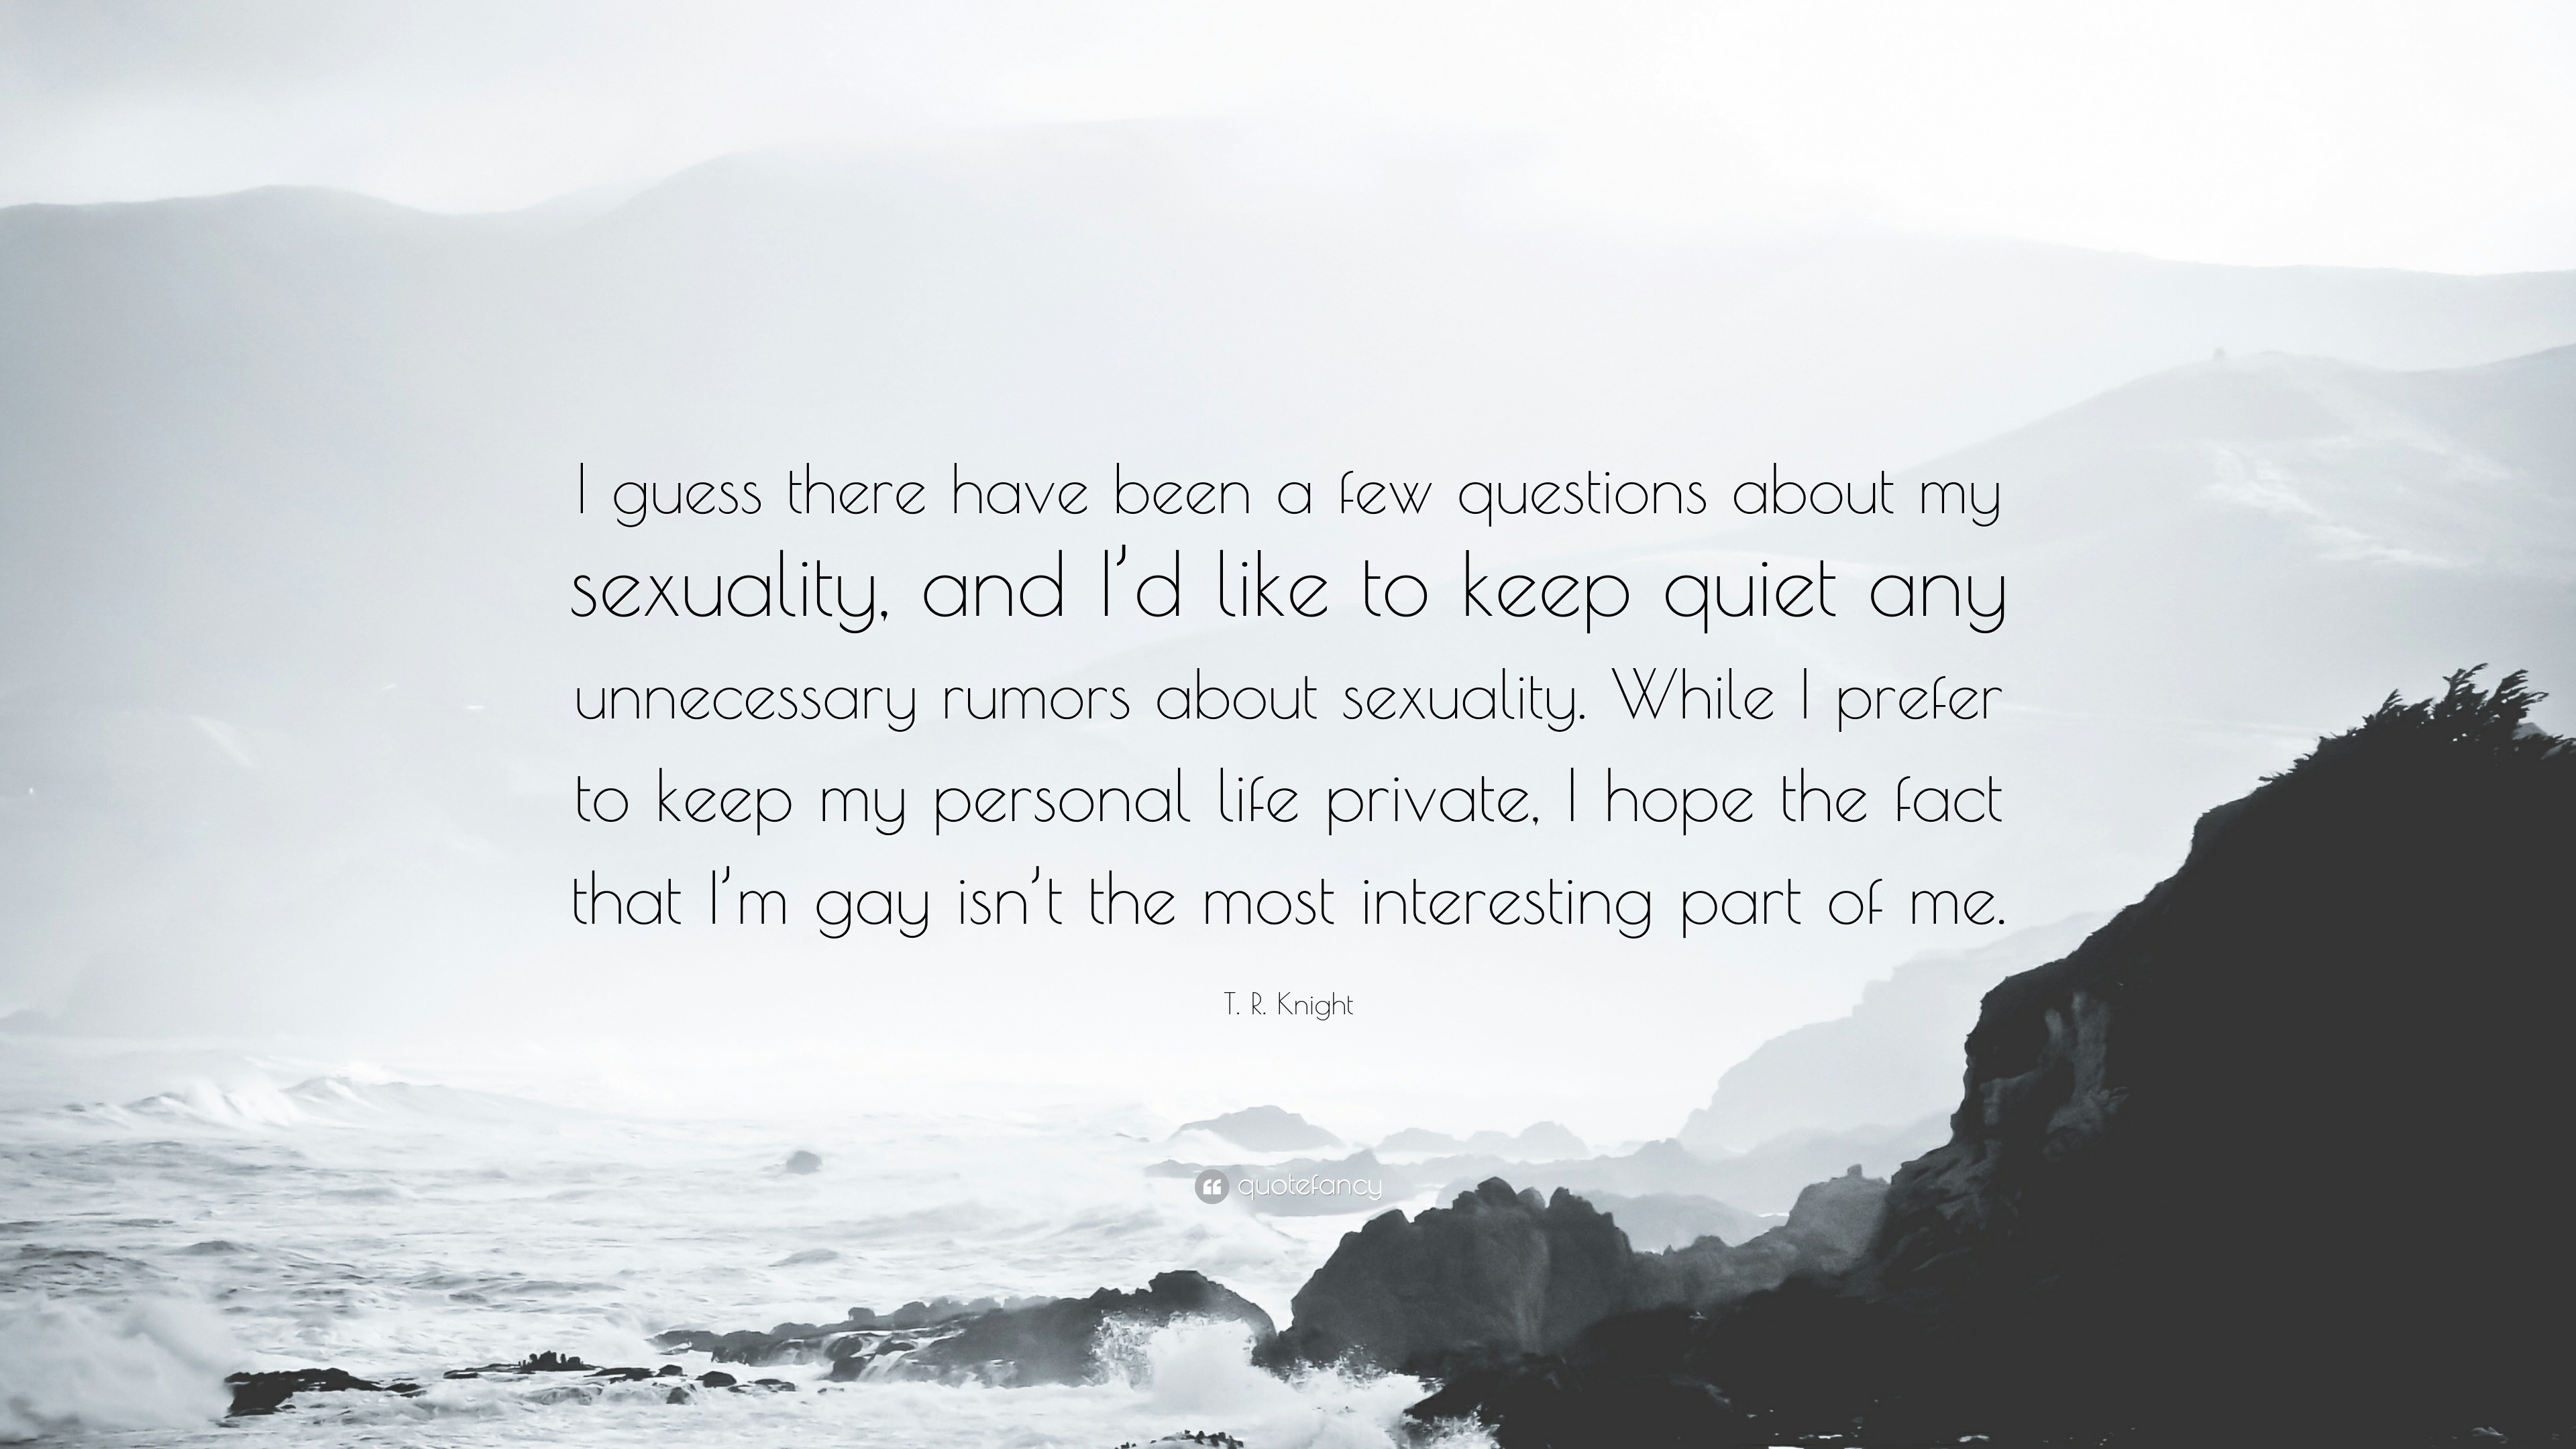 kugle seng blande T. R. Knight Quote: “I guess there have been a few questions about my  sexuality, and I'd like to keep quiet any unnecessary rumors about sexu...”